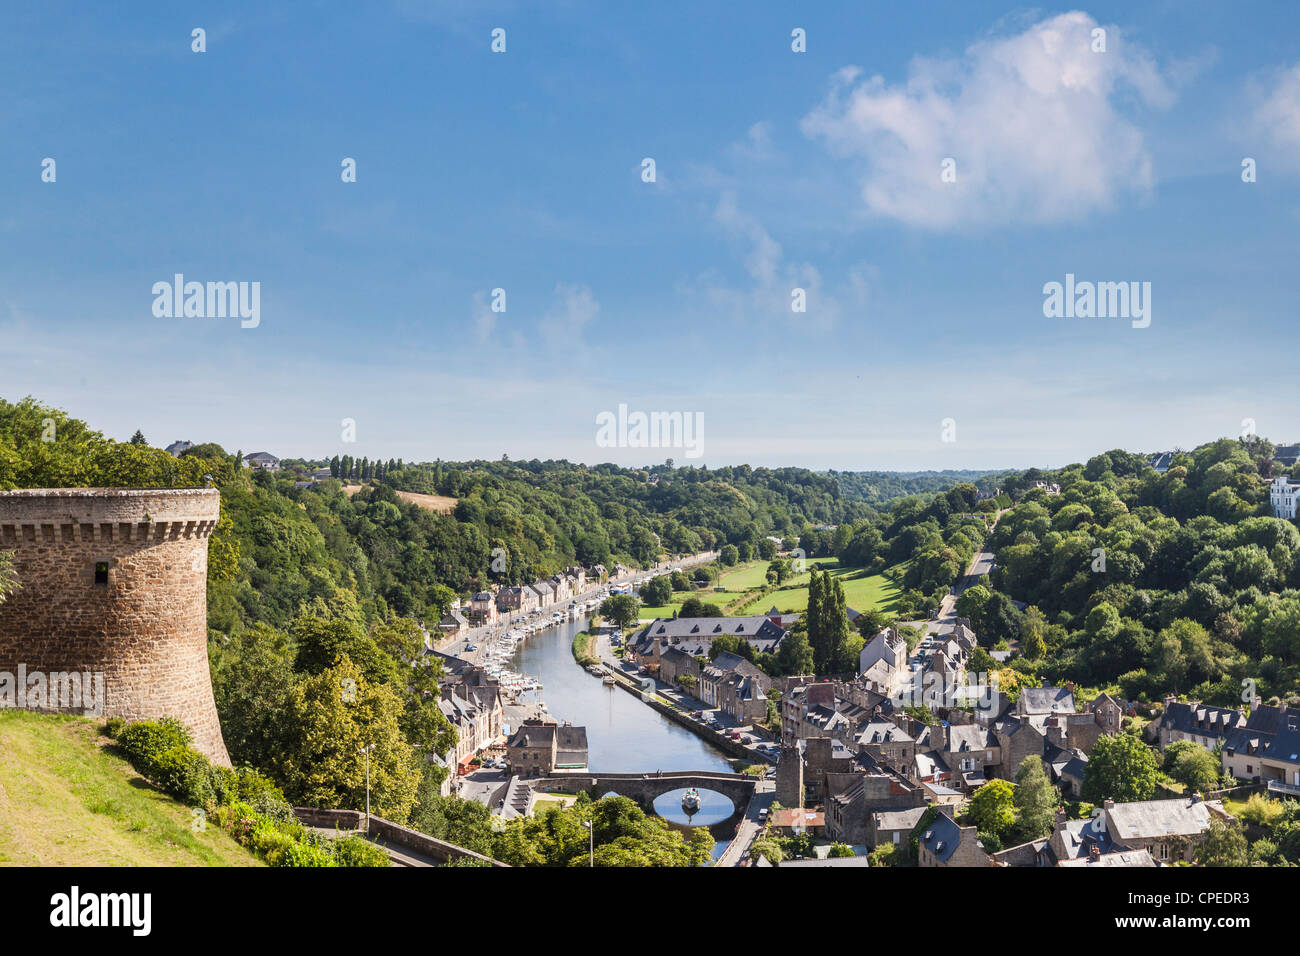 The picturesque medieval port of Dinan on the Rance Estuary, Brittany, France, seen from the walls of the fortified city. Stock Photo